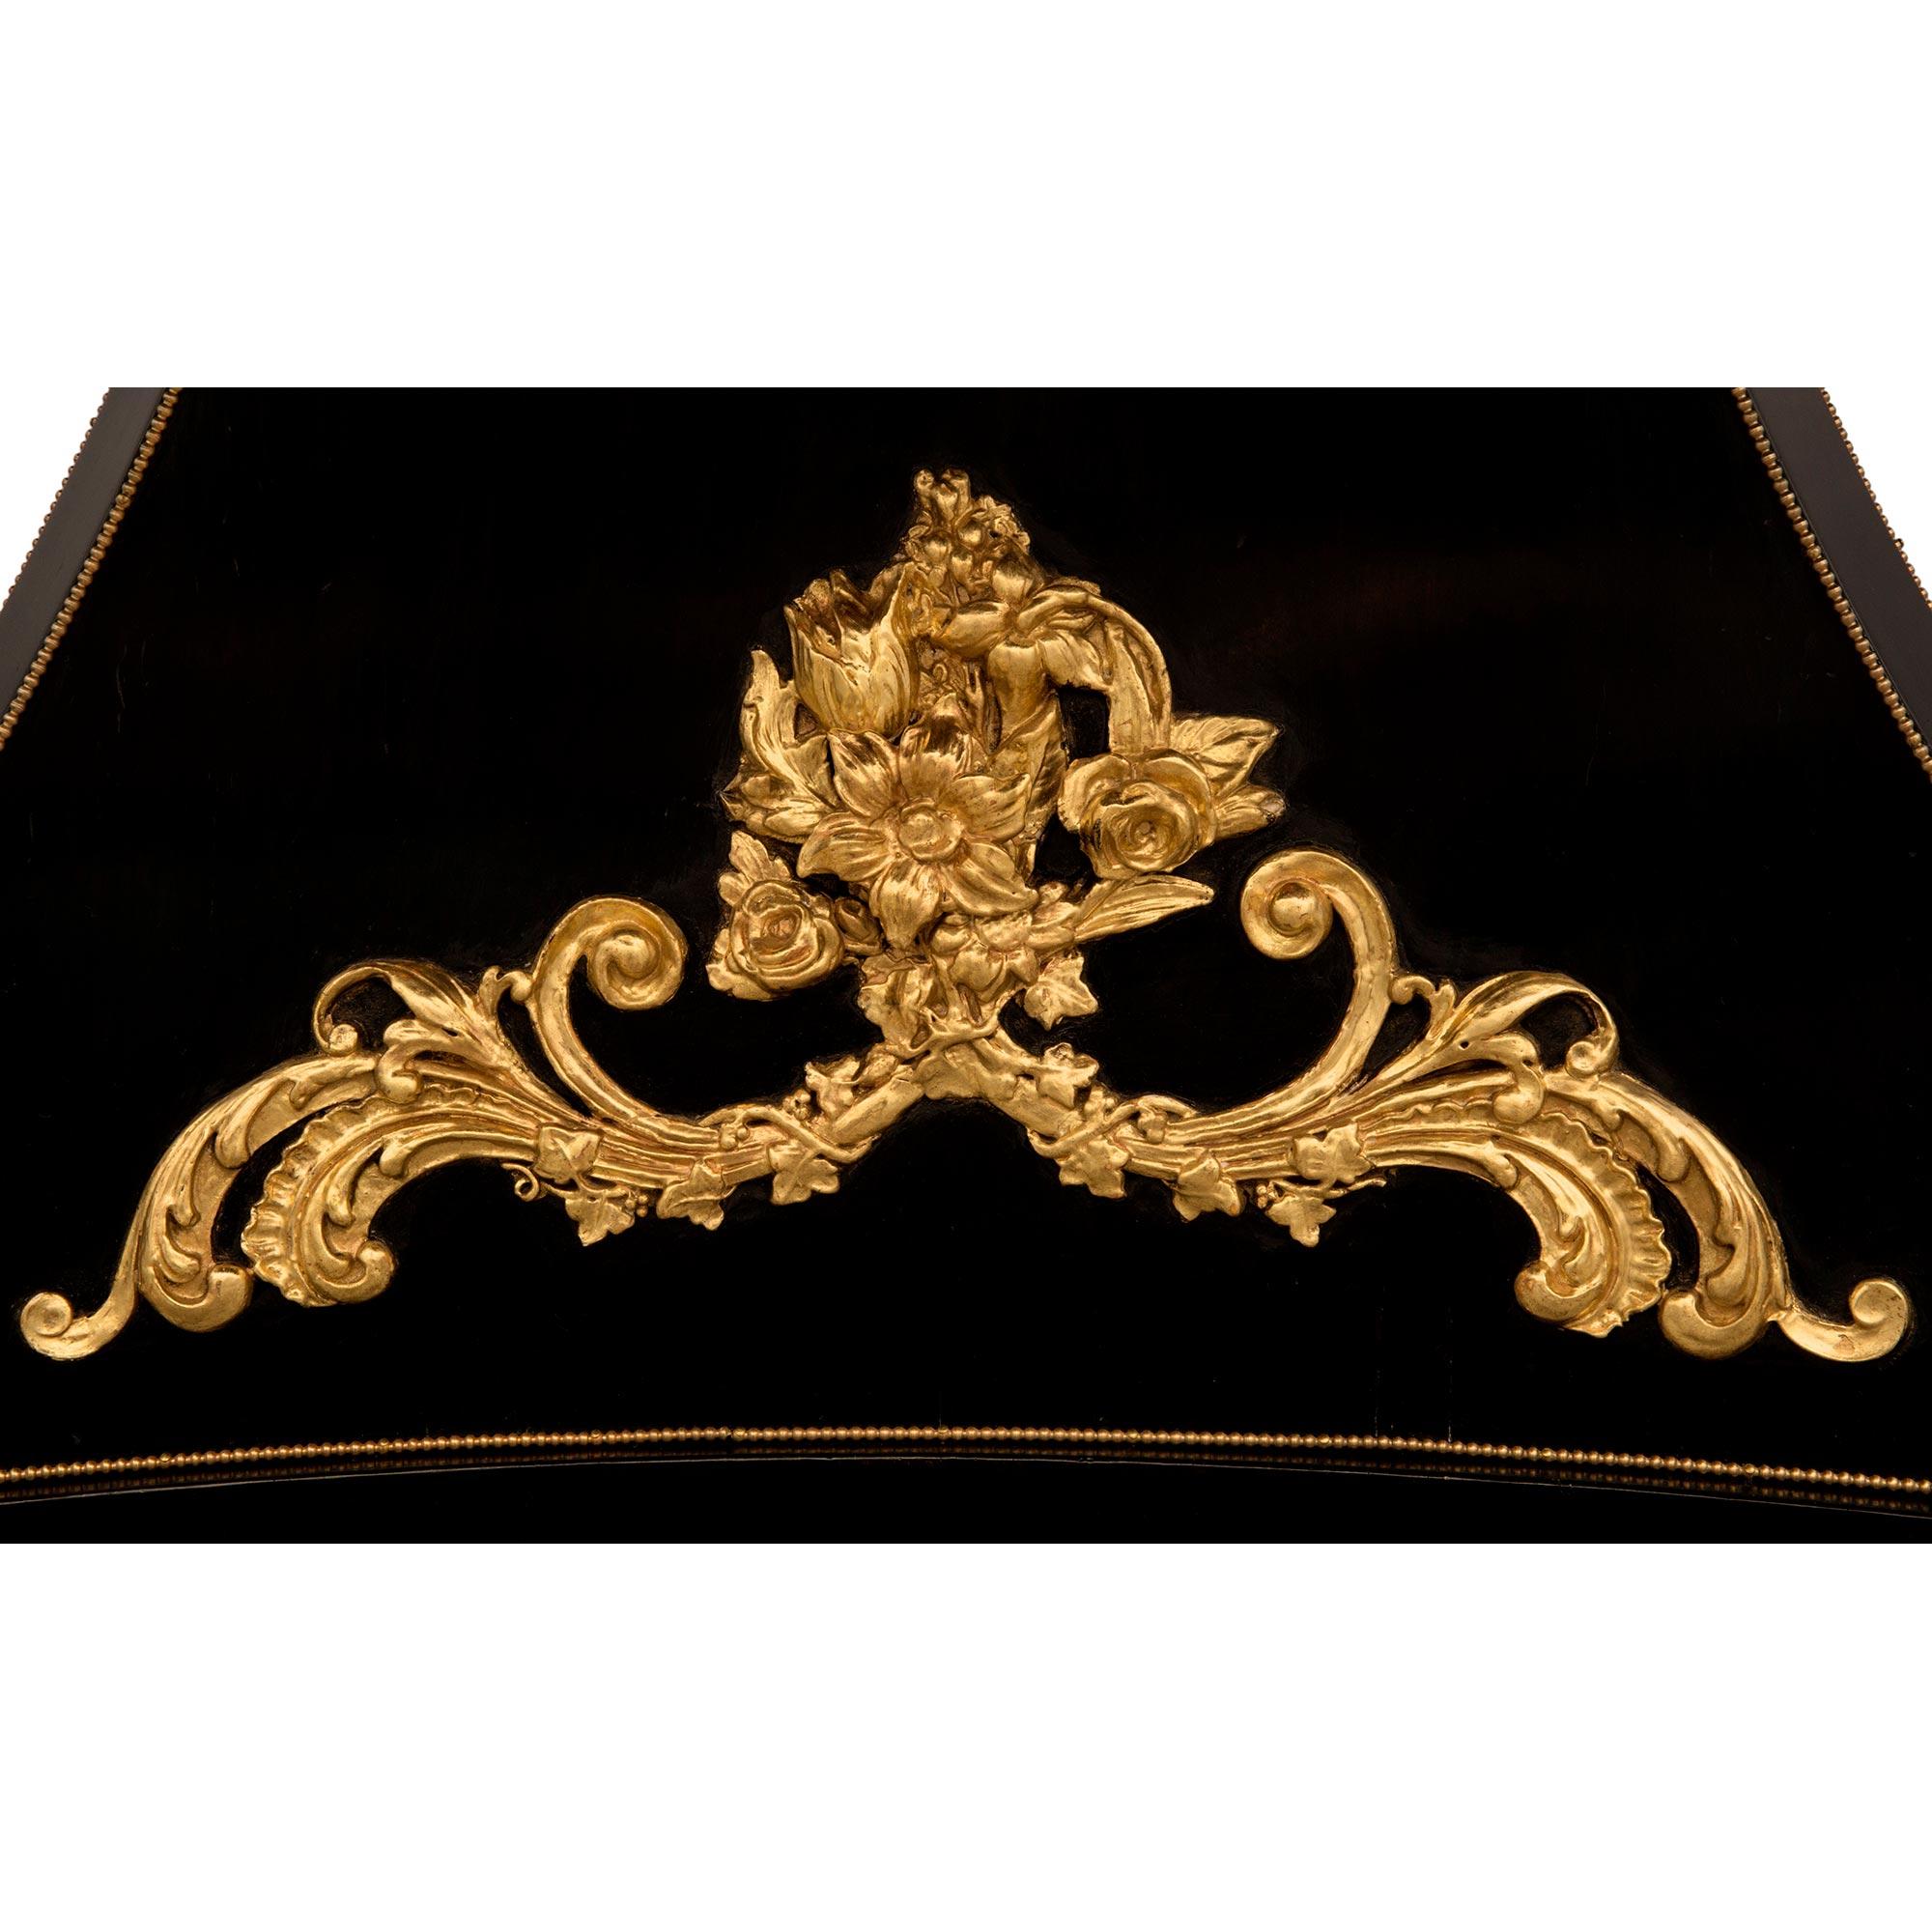 French 19th Century Napoleon III Period Ebony Ormolu and Giltwood Center Table For Sale 3